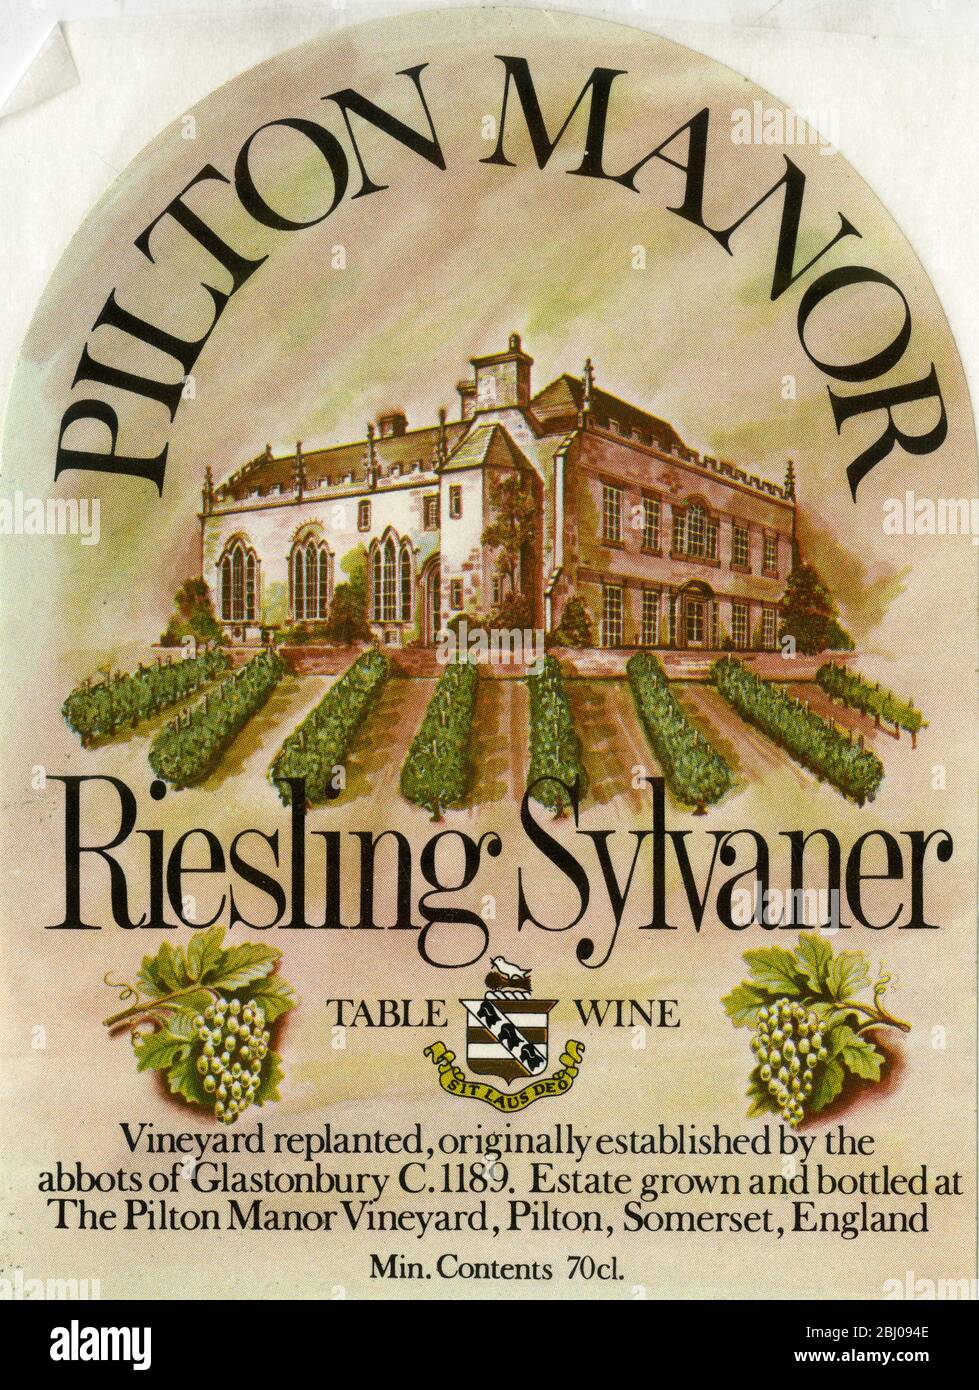 Wine Label. - Pilton Manor. Riesling Sylvaner. Table Wine. Vineyard replanted, originally established by the abbots of Glastonbury C. 1189. Estate Grown and Bottled at The Pilton Manor Vineyard, Pilton, Somerset, England. Stock Photo